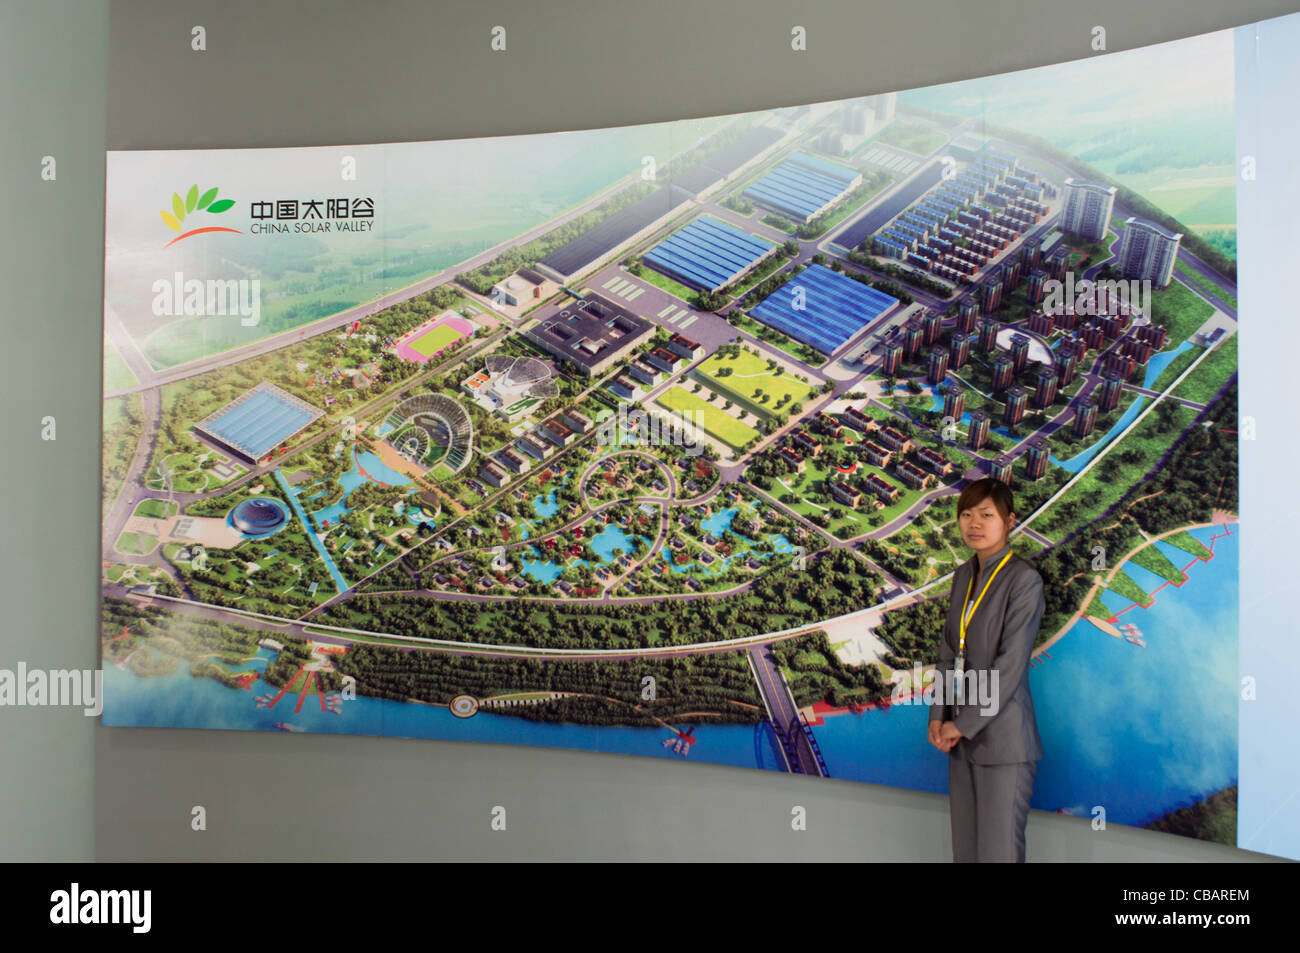 A hostess in front of the big billboard with the project of the China Solar Valley. Dezhou, Shandong, China Stock Photo